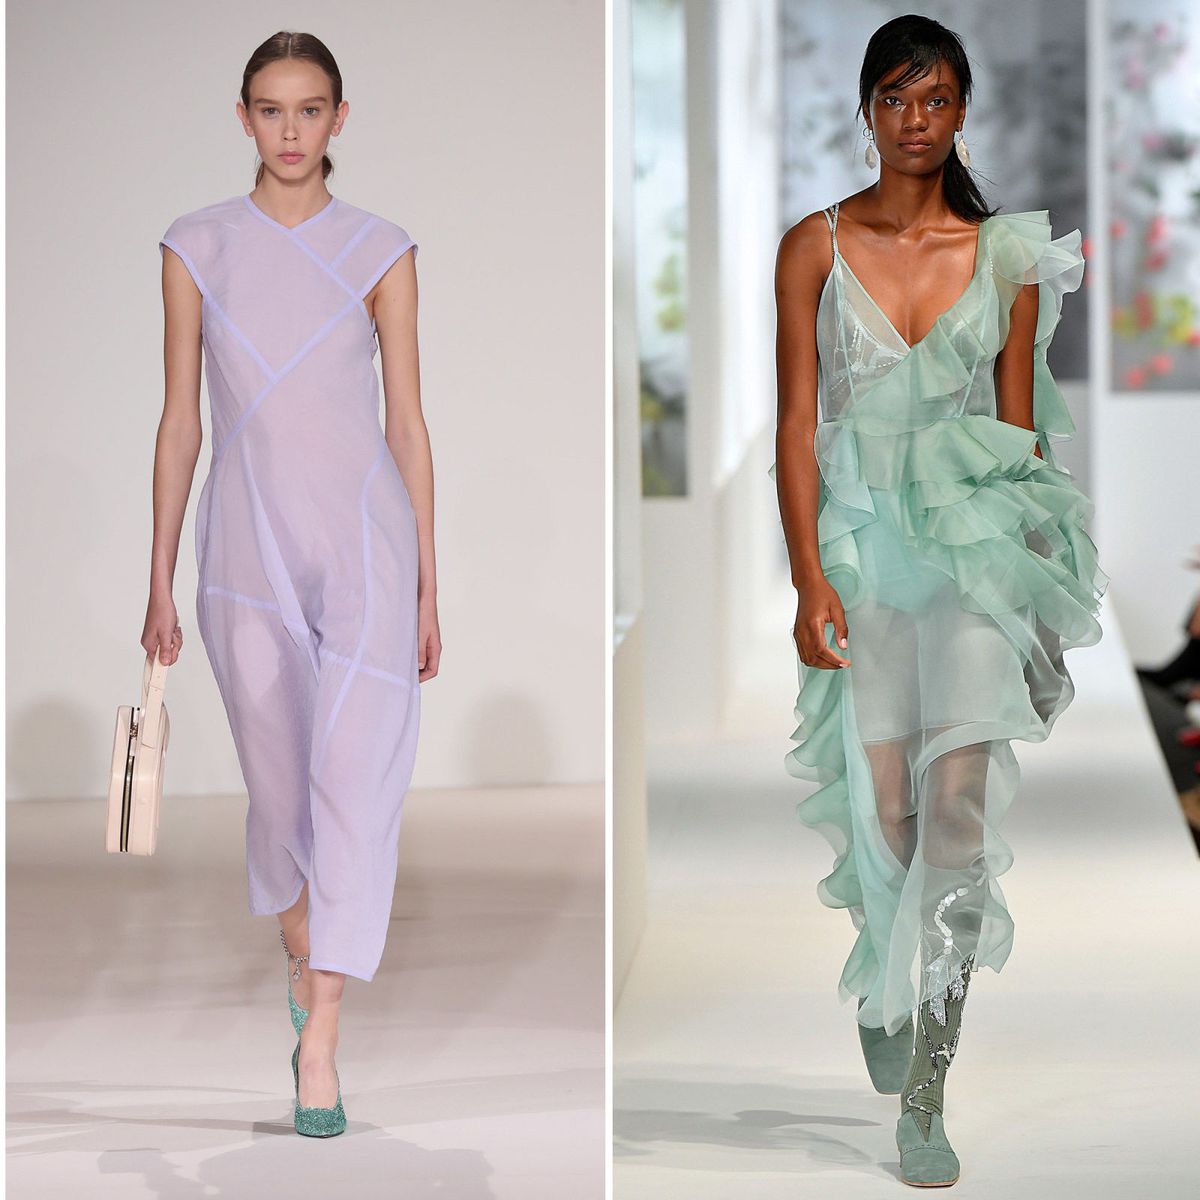 Pastel fashion trend spring 2018 – Ice cream colours trend